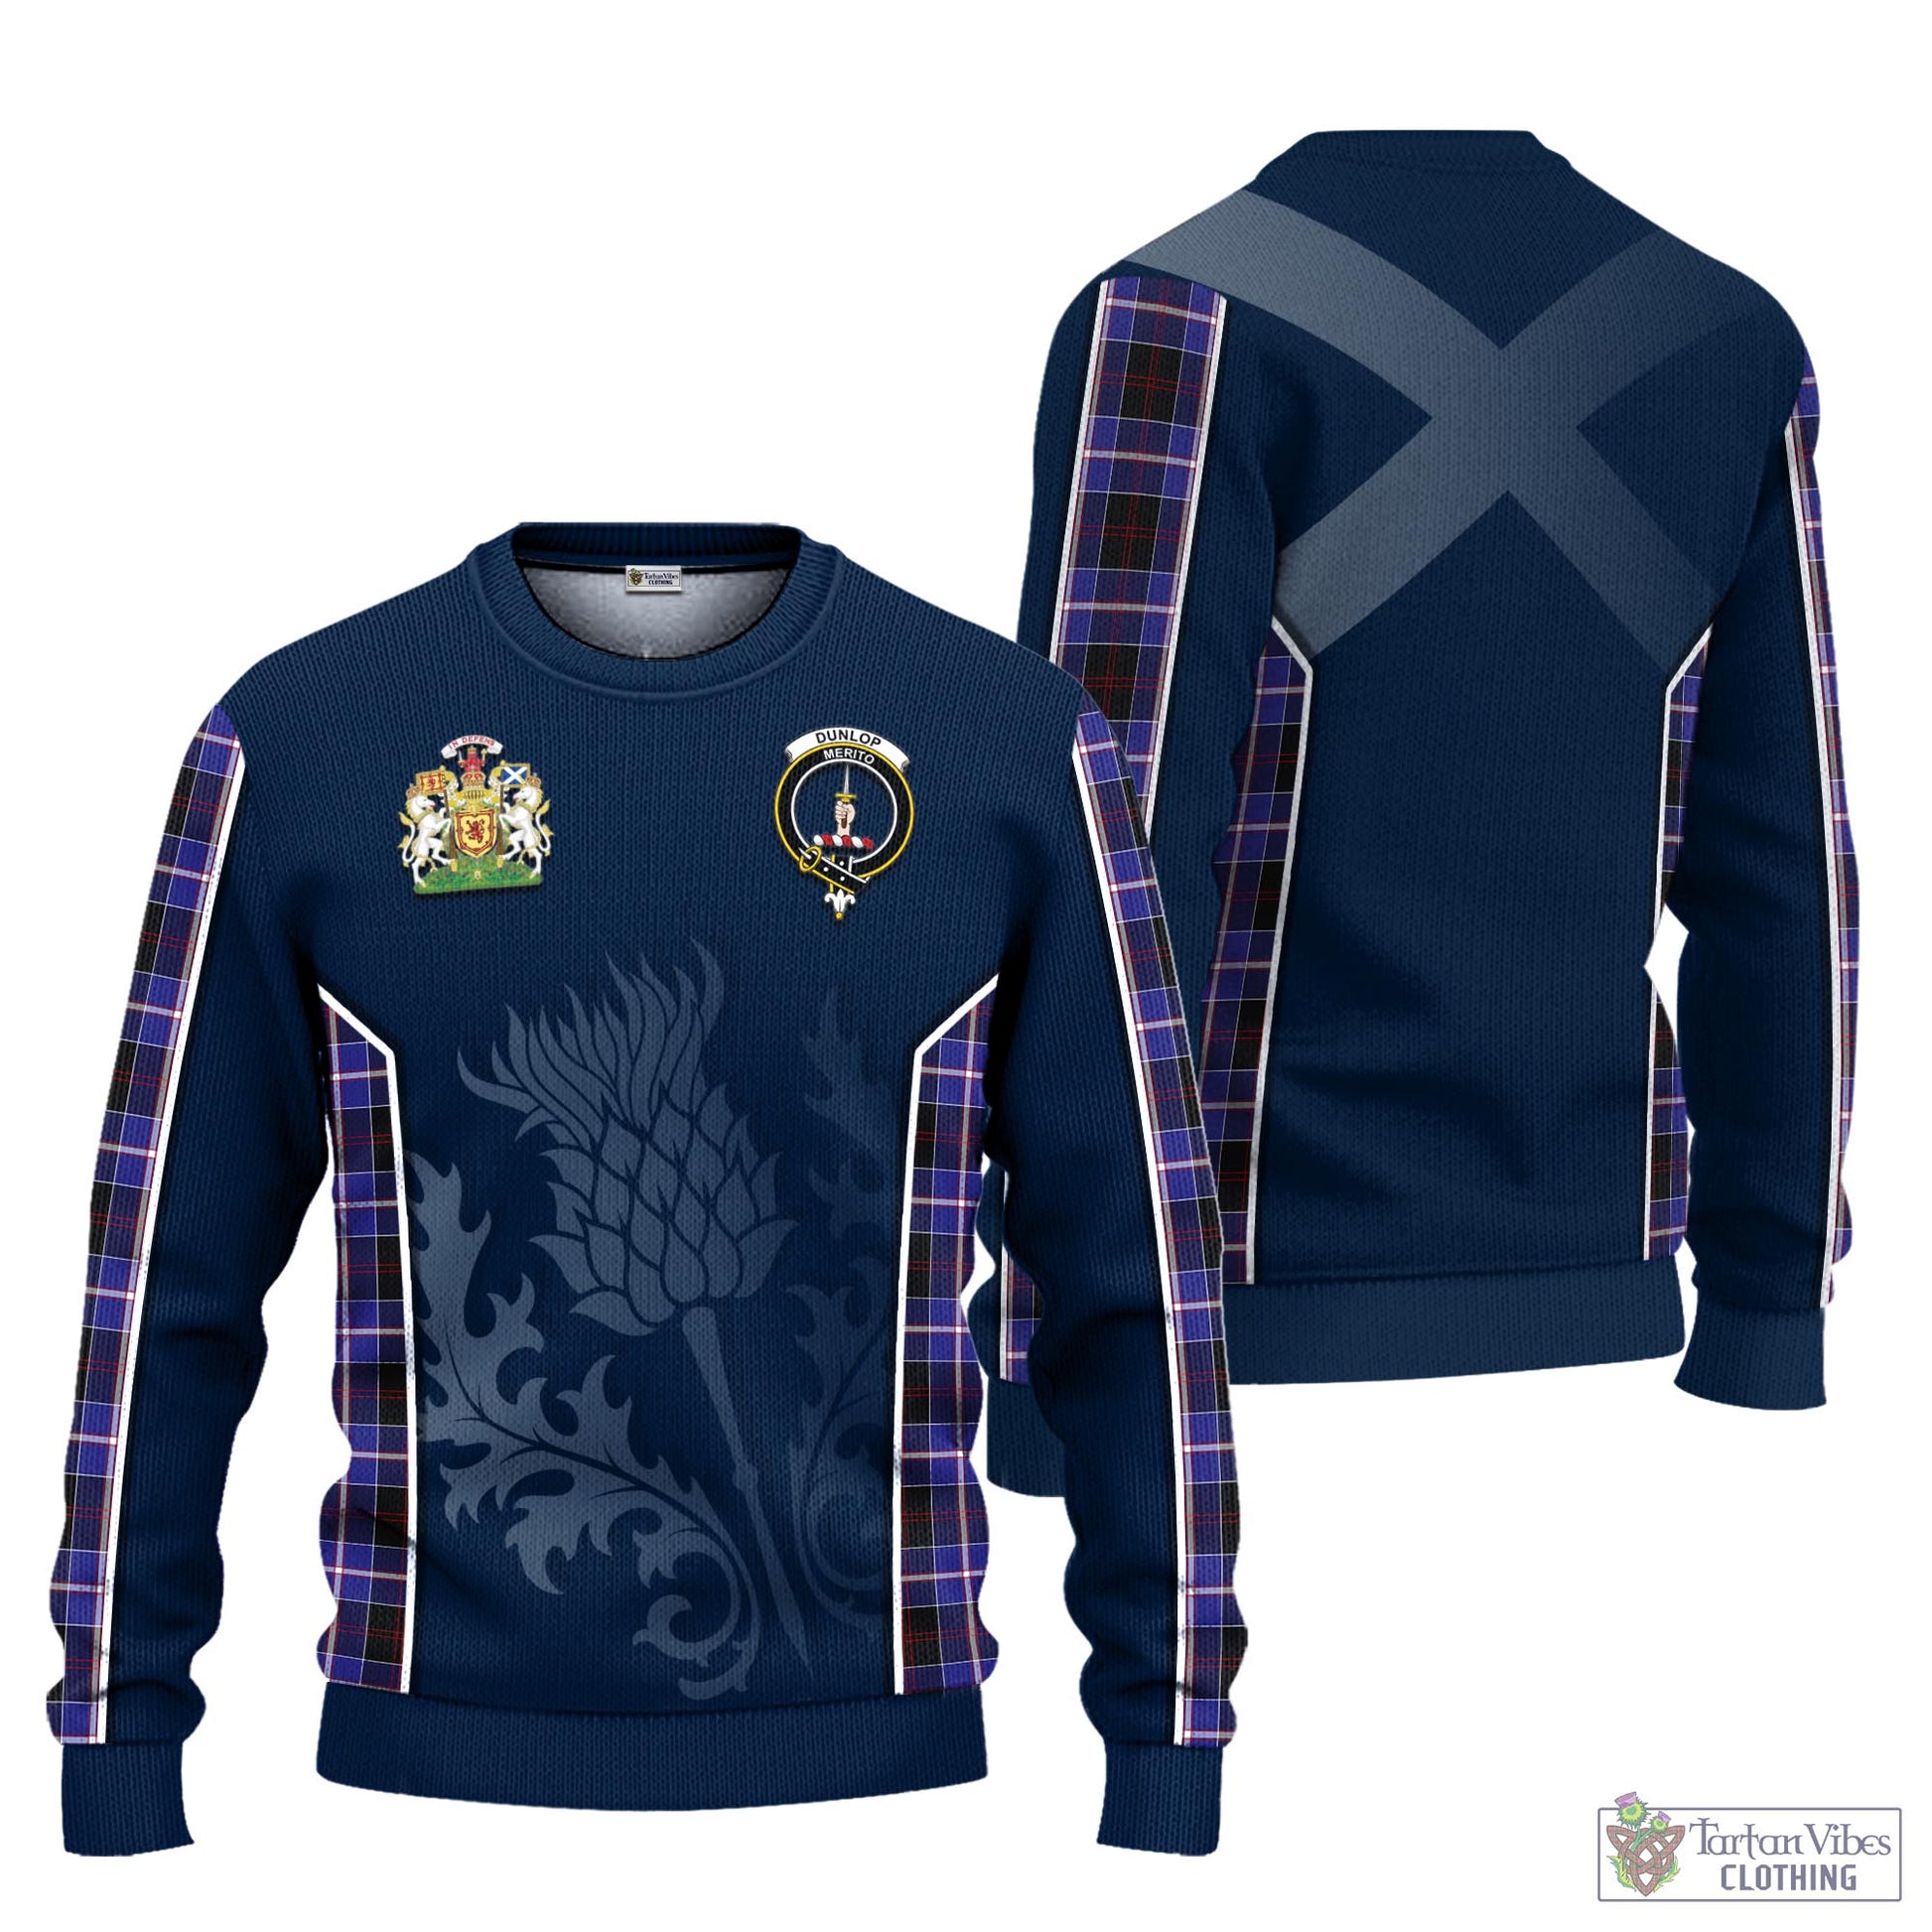 Tartan Vibes Clothing Dunlop Modern Tartan Knitted Sweatshirt with Family Crest and Scottish Thistle Vibes Sport Style